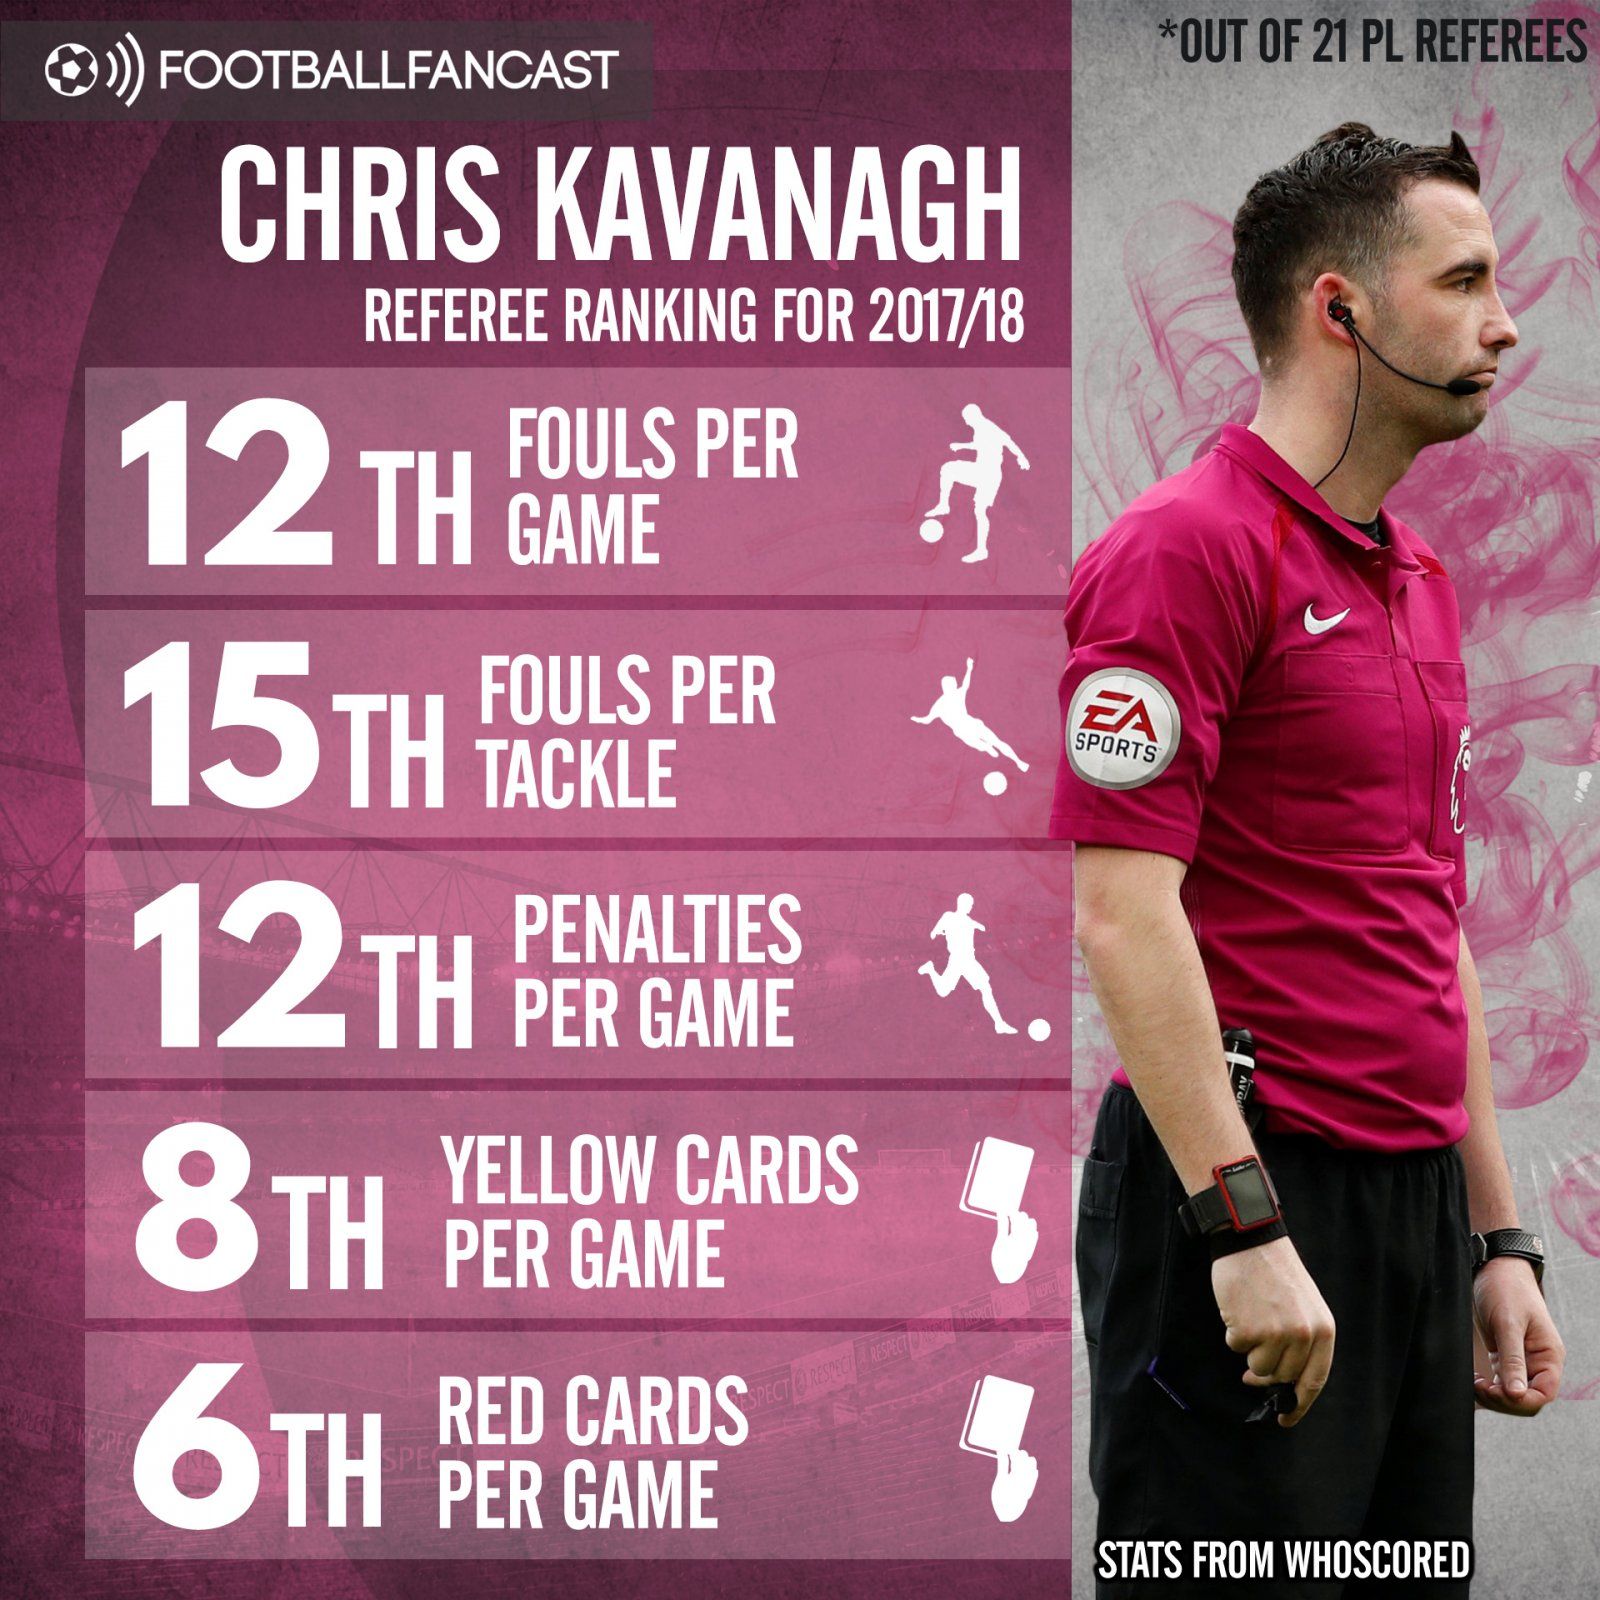 Chris Kavanagh's referee stats from 2017-18